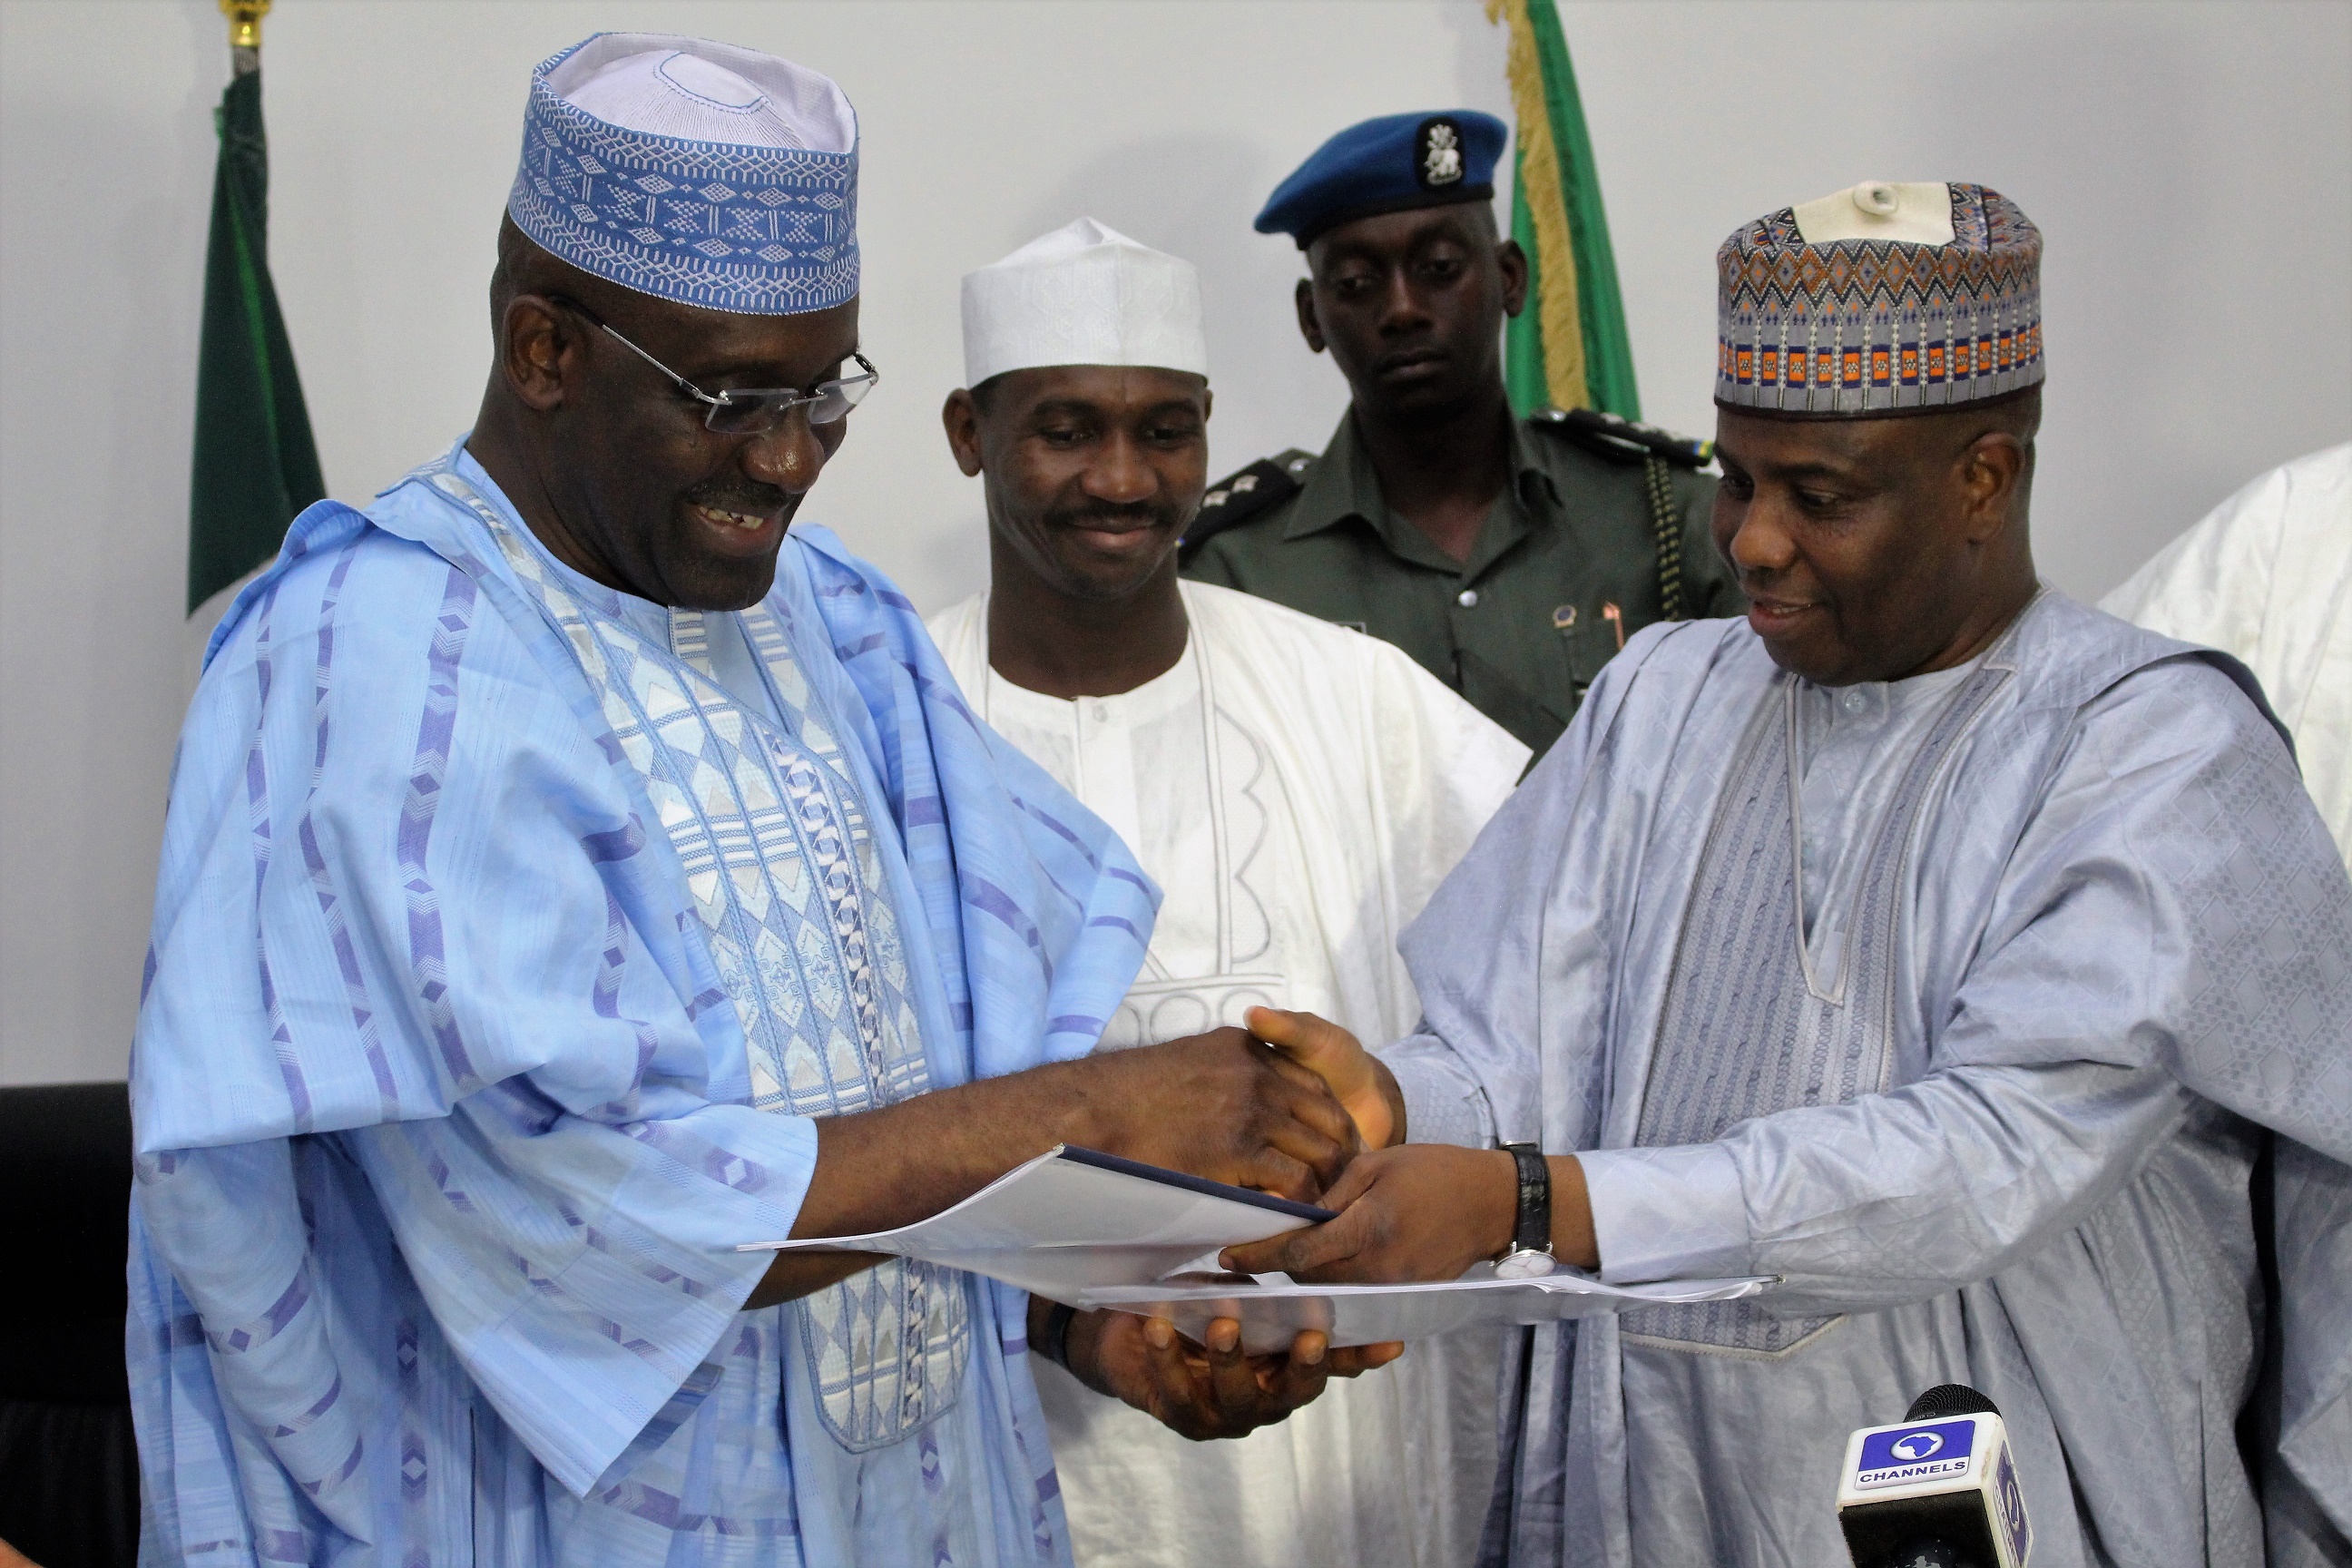 Ag Managing Director of Bank of Industry, Mr. Wahid Olagunju with Sokoto State Governor, Aminu Waziri Tambuwal, after the signing of agreement to provide N2billion to SMEs in Sokoto. Middle of Deputy Governor Ahmed Aliyu.